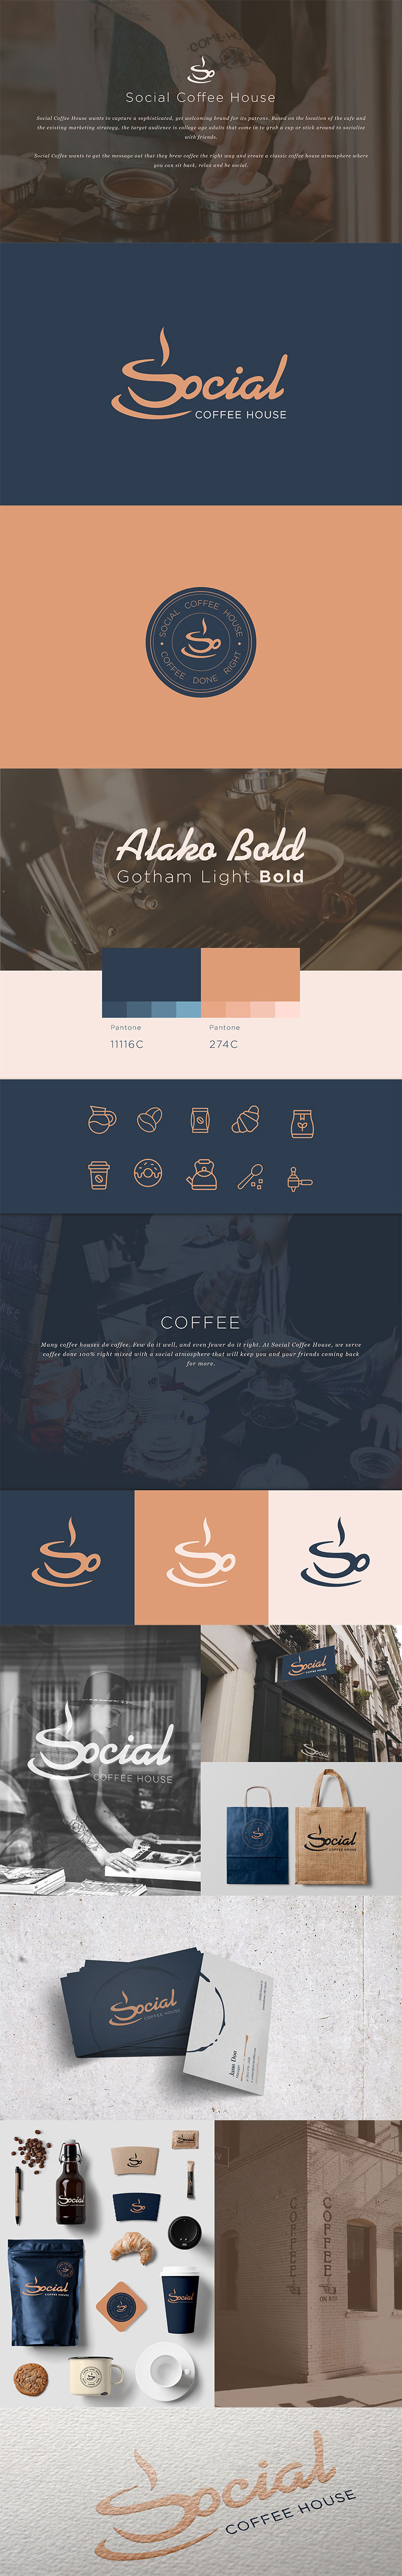 Social Coffehouse's brand presentation showcasing new logo design, color use, typography and mockups